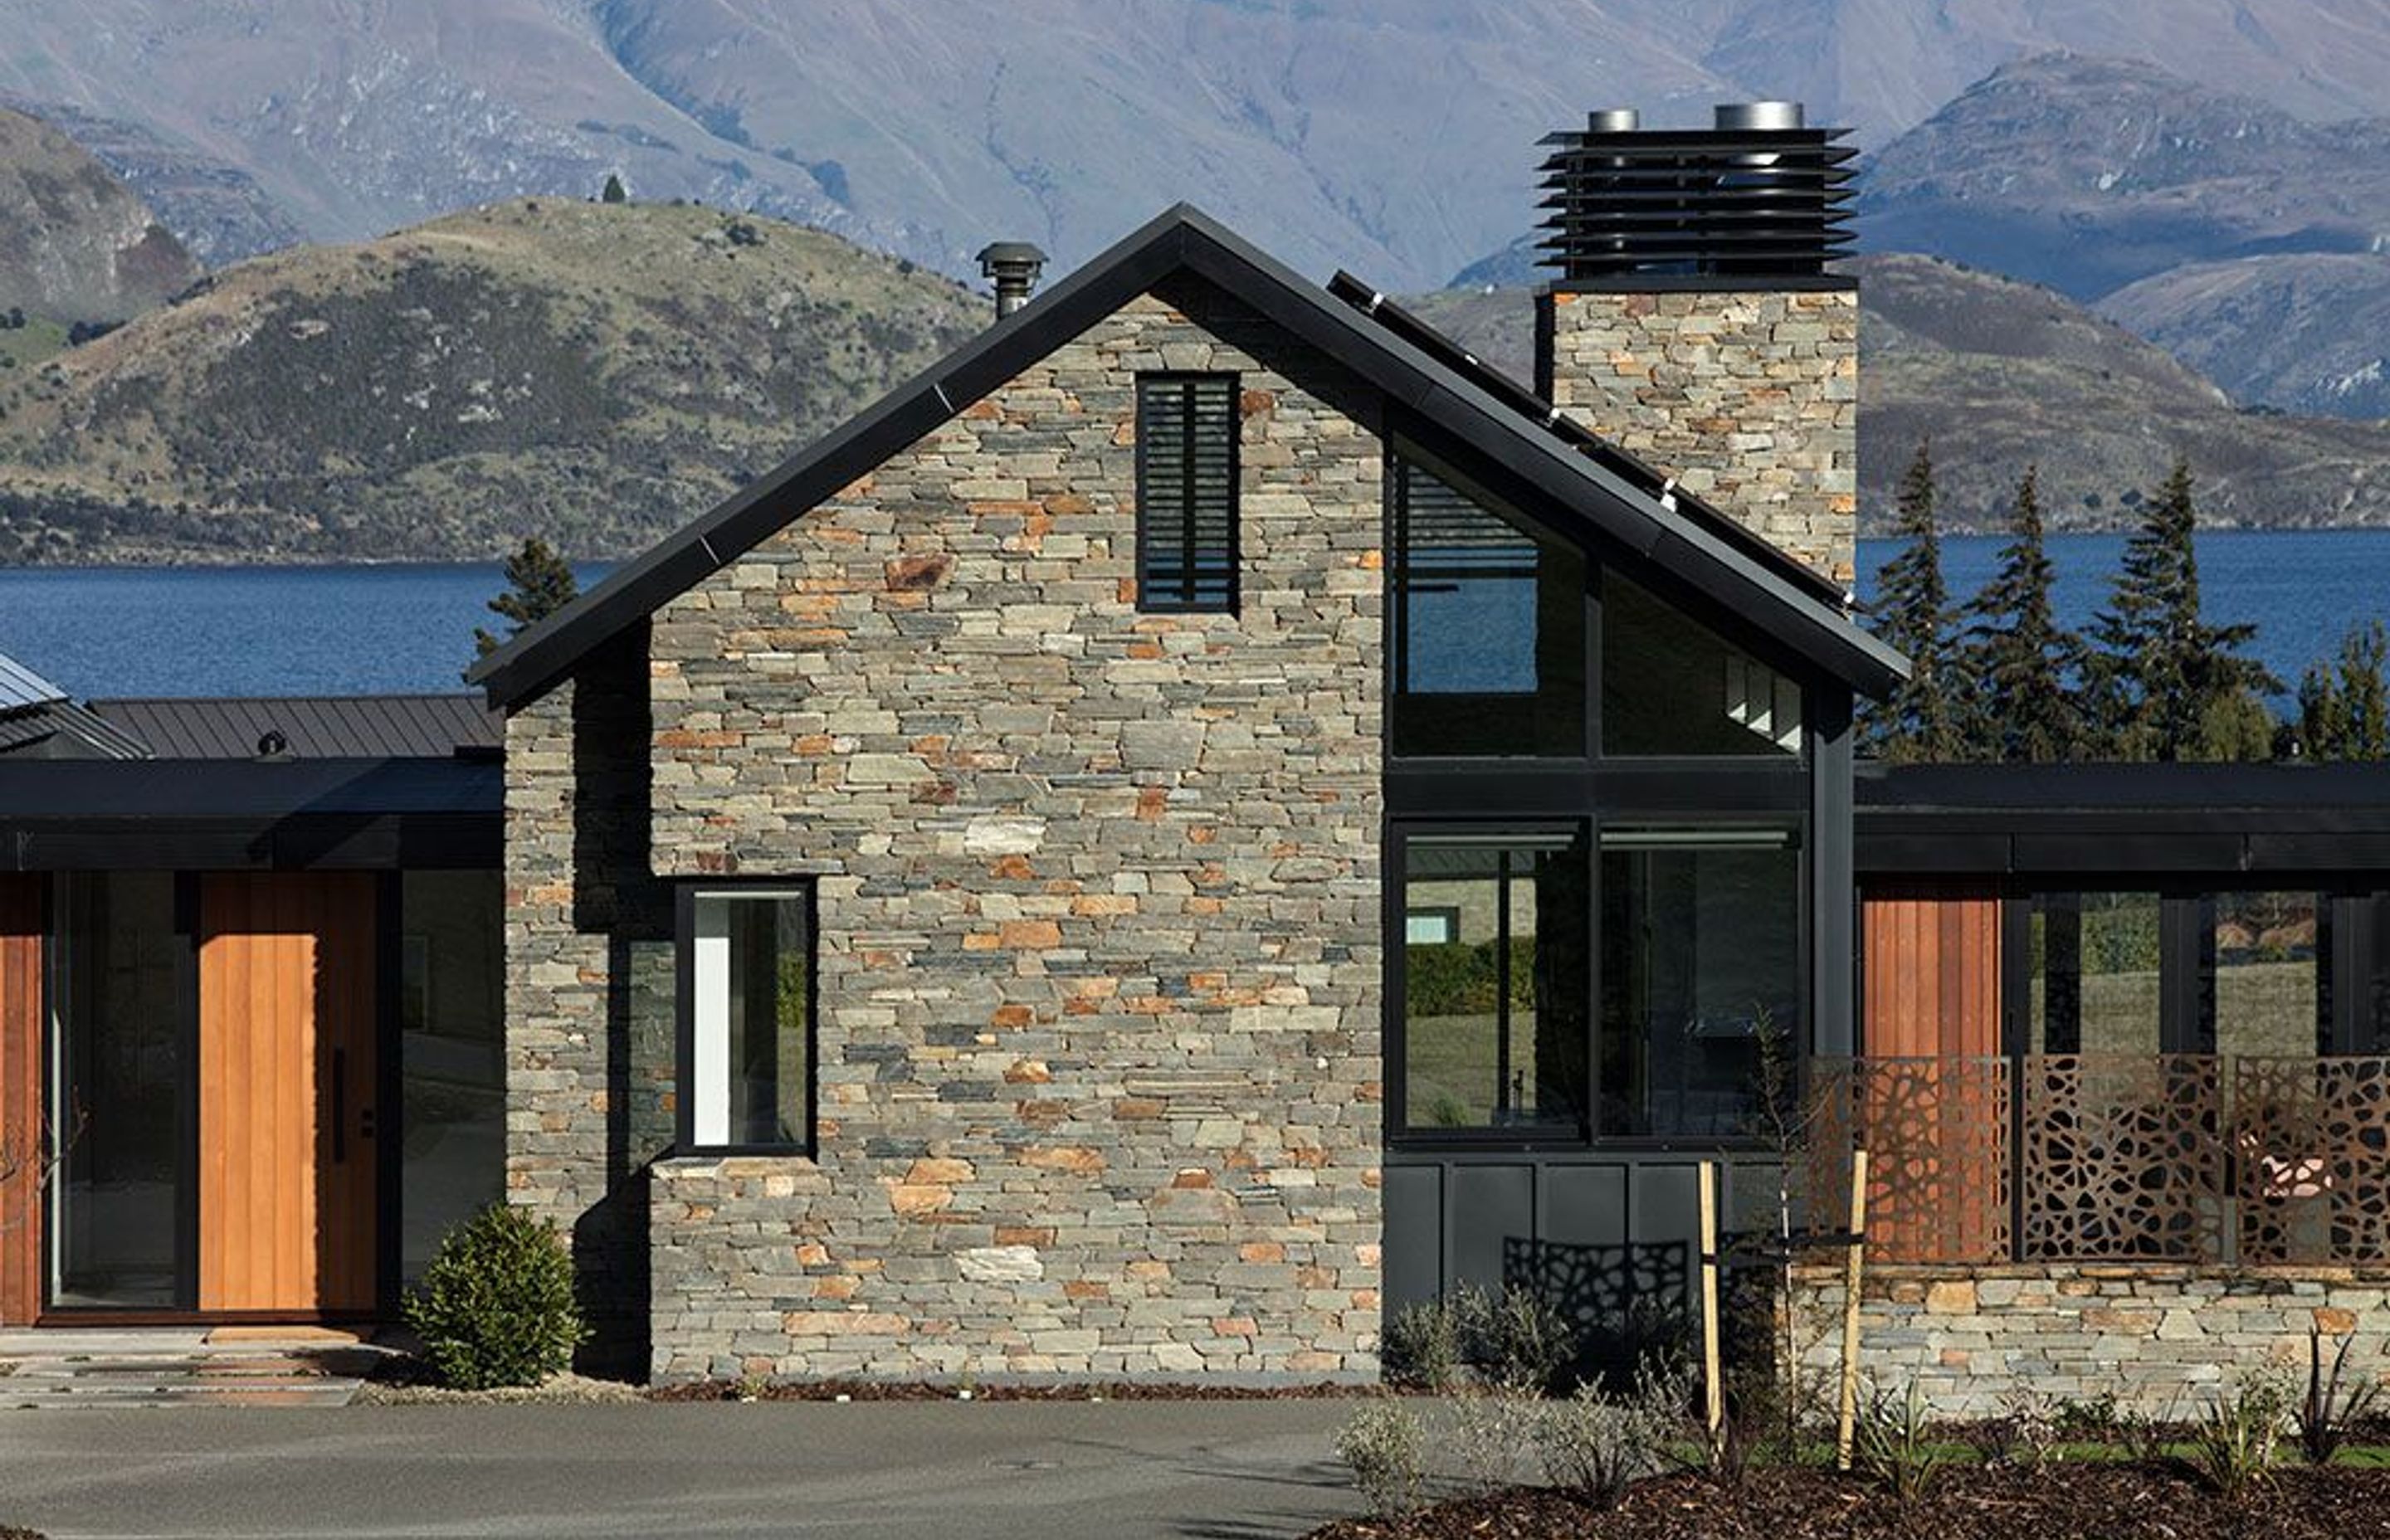 The material palette helps to merge the home with its landscape, with schist playing a big part both in the external cladding and in the interiors, where it is used for accent walls.